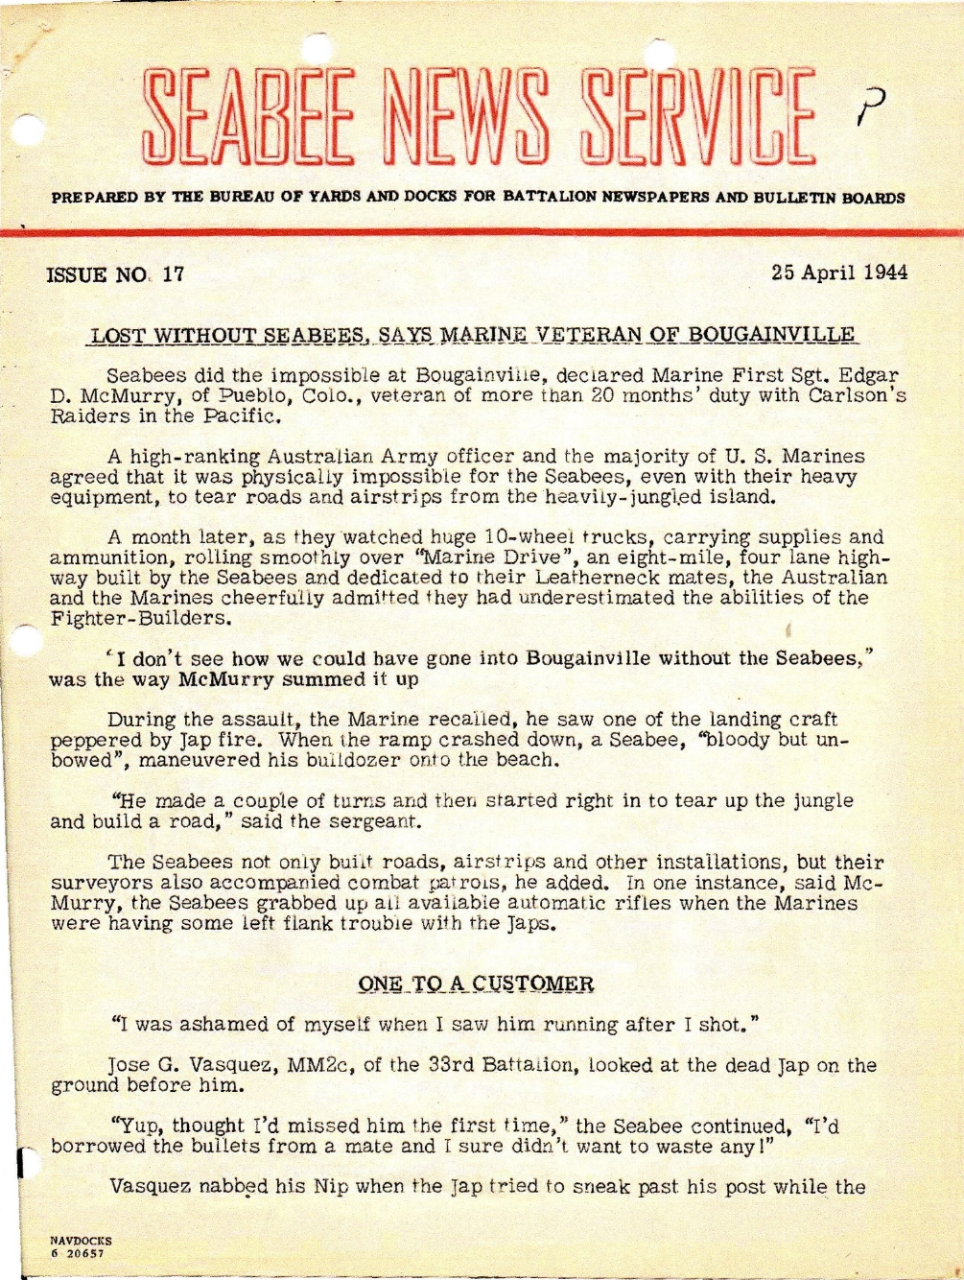 Front cover of Seabee News Service No. 17